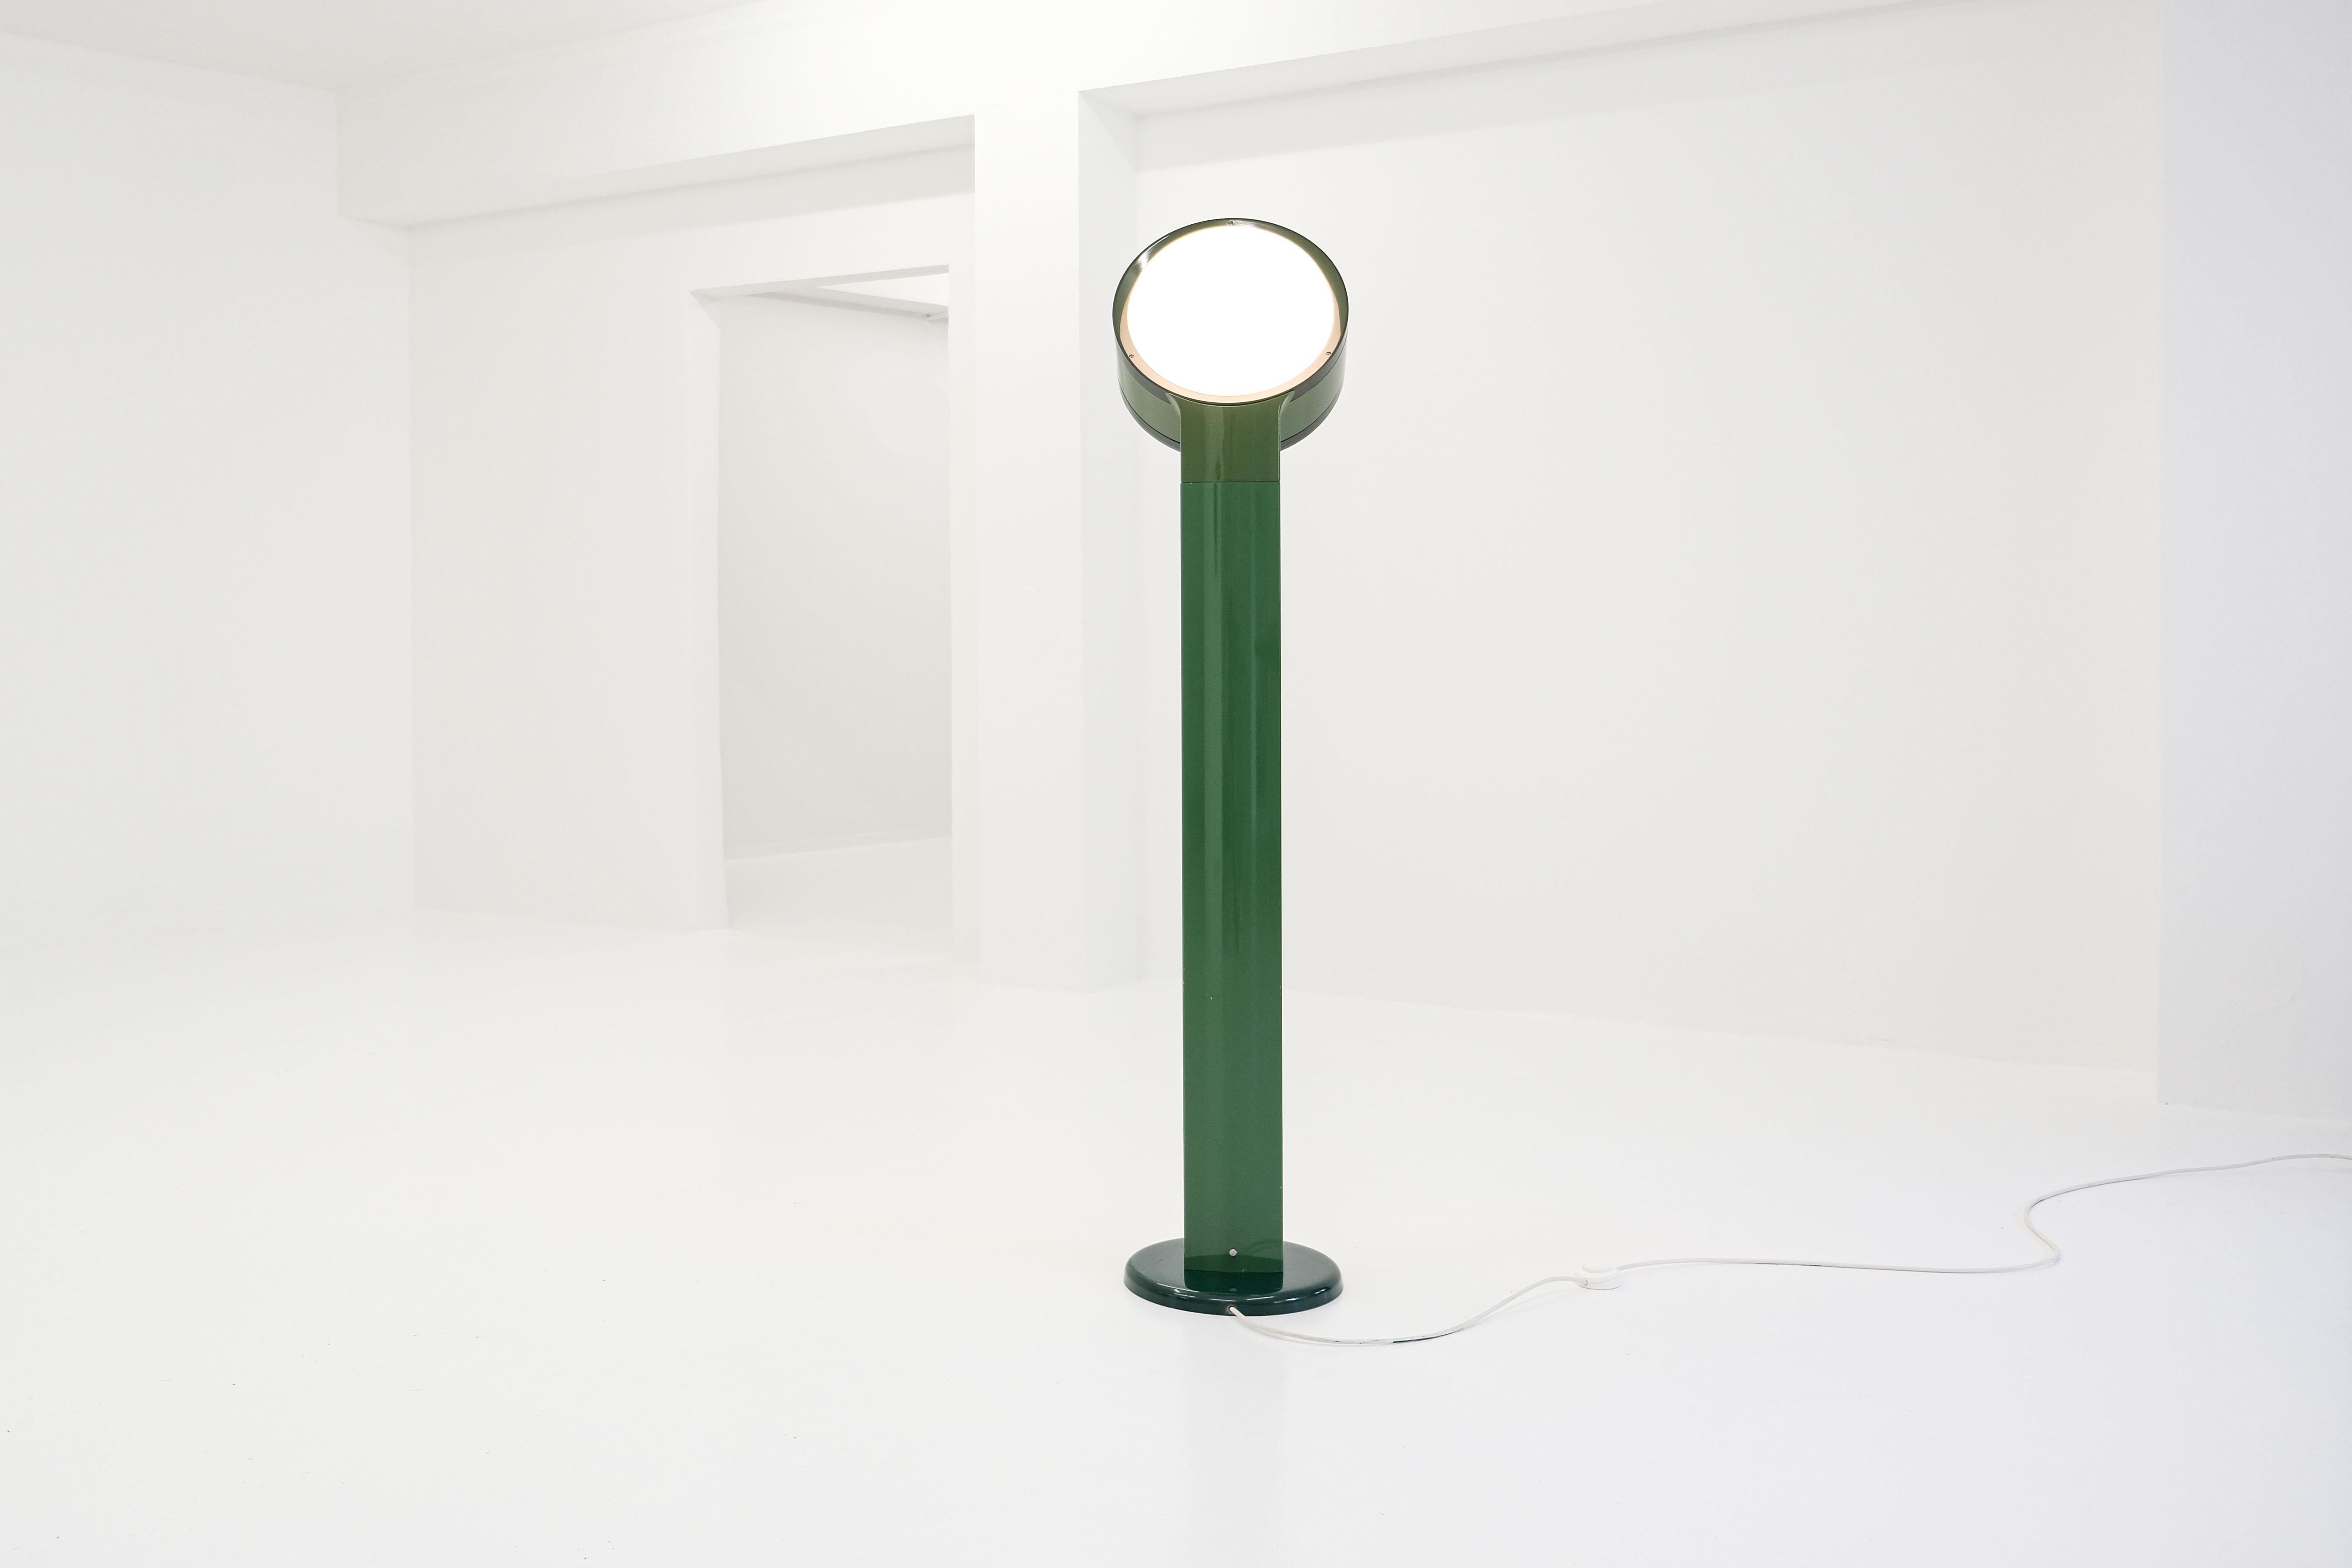 Tamburo Floor Lamp by Afra & Tobia Scarpa for Flos for Inside and Outside Use 1